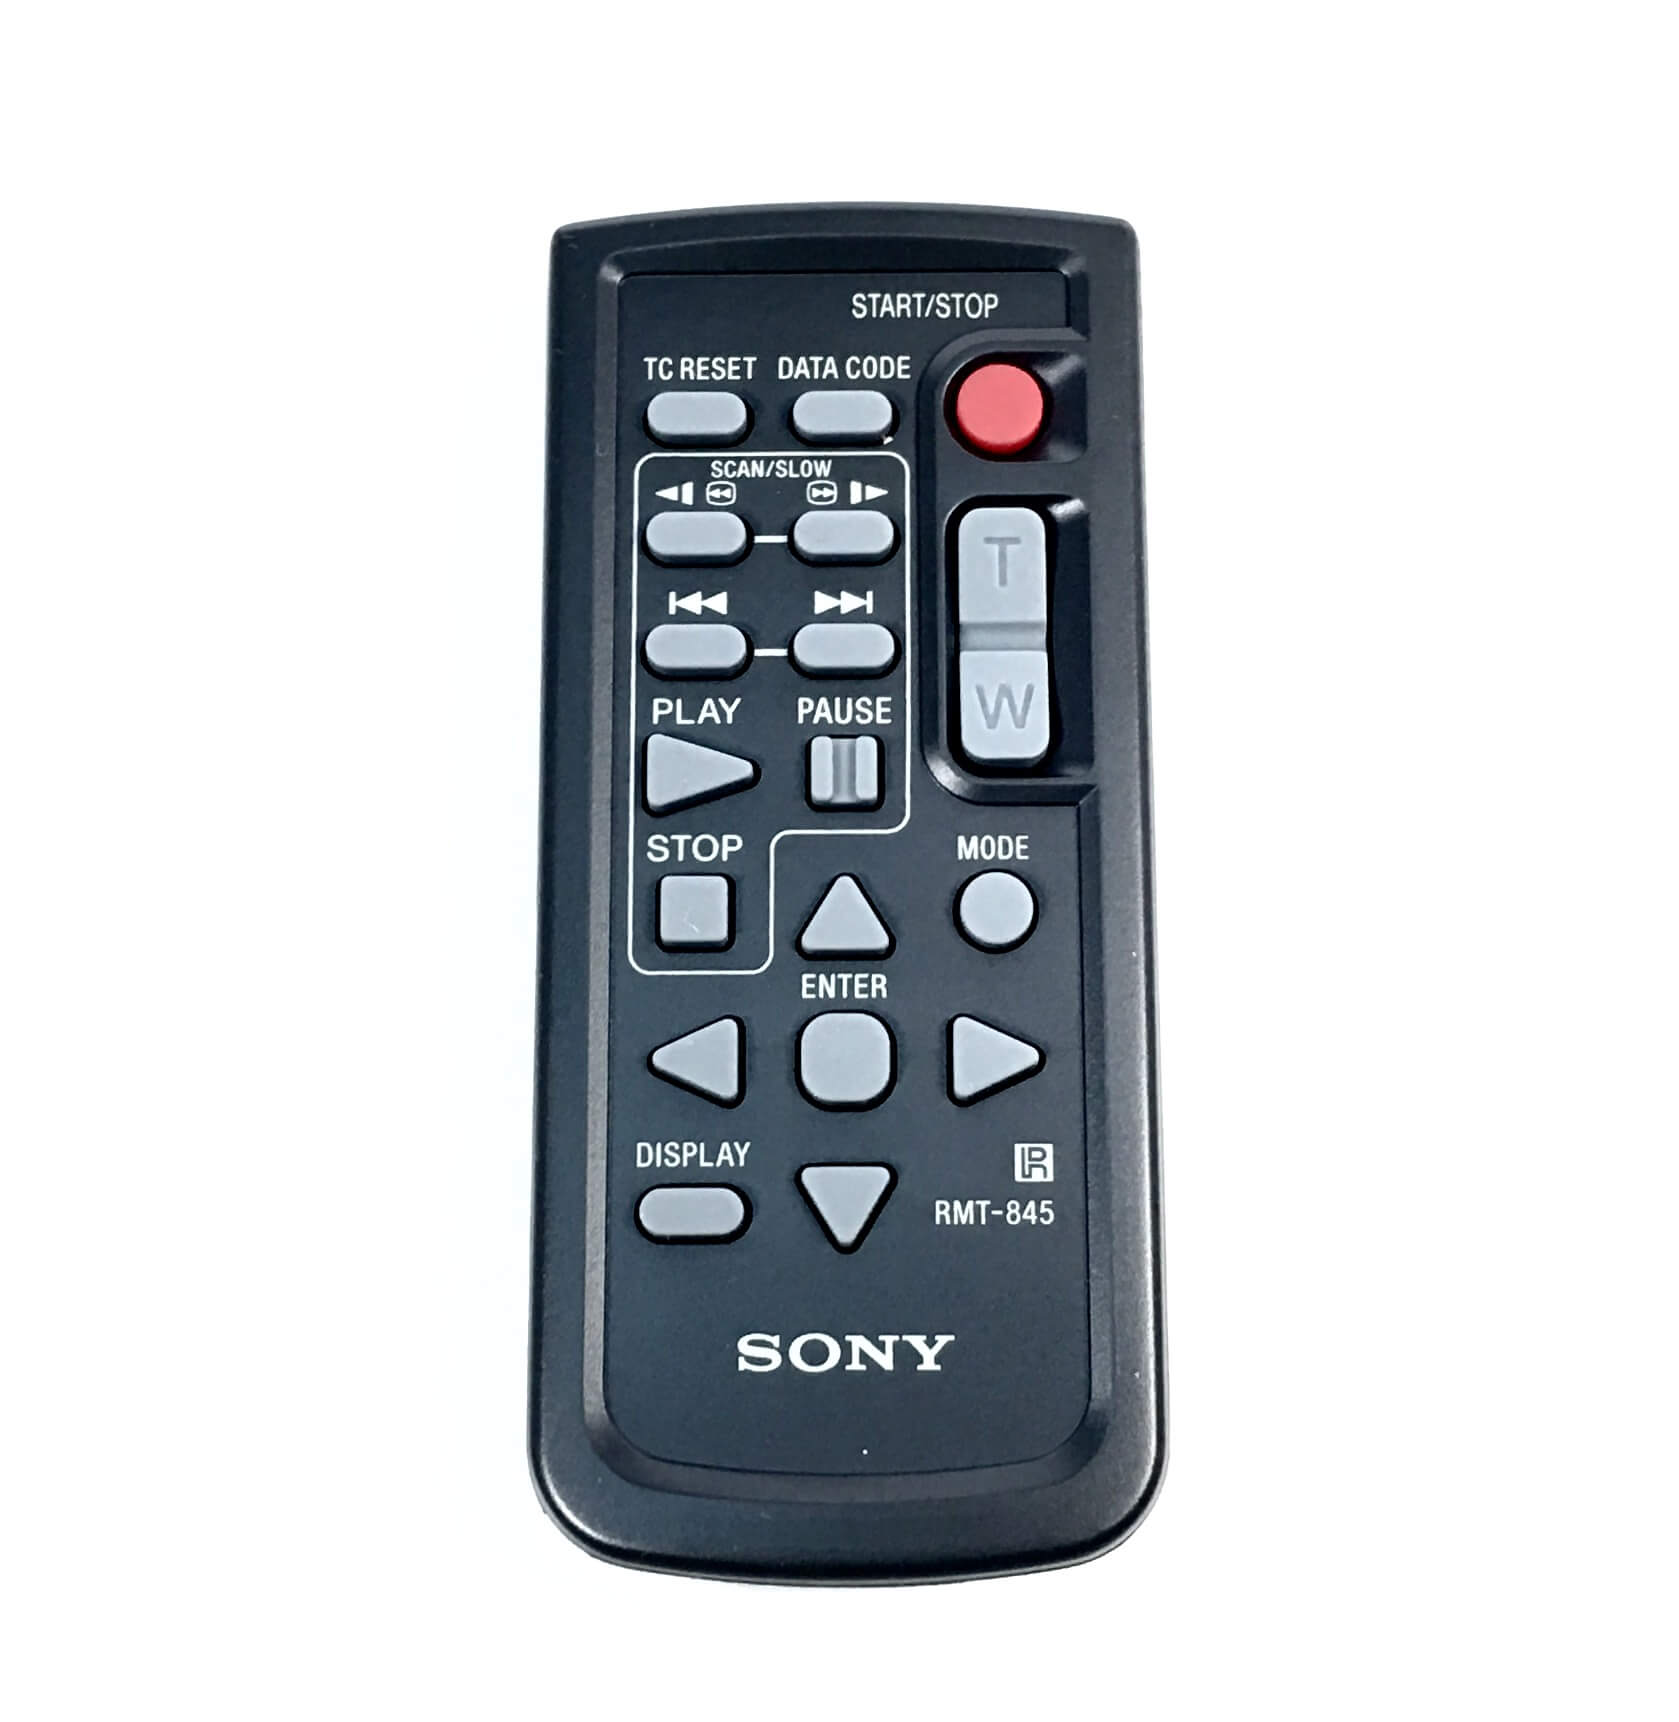 Original wireless remote control that came with the Sony PXW-Z150 camcorder. It is a genuine Sony part, sourced directly from Sony USA. Brand new factory fresh. Free Shipping.